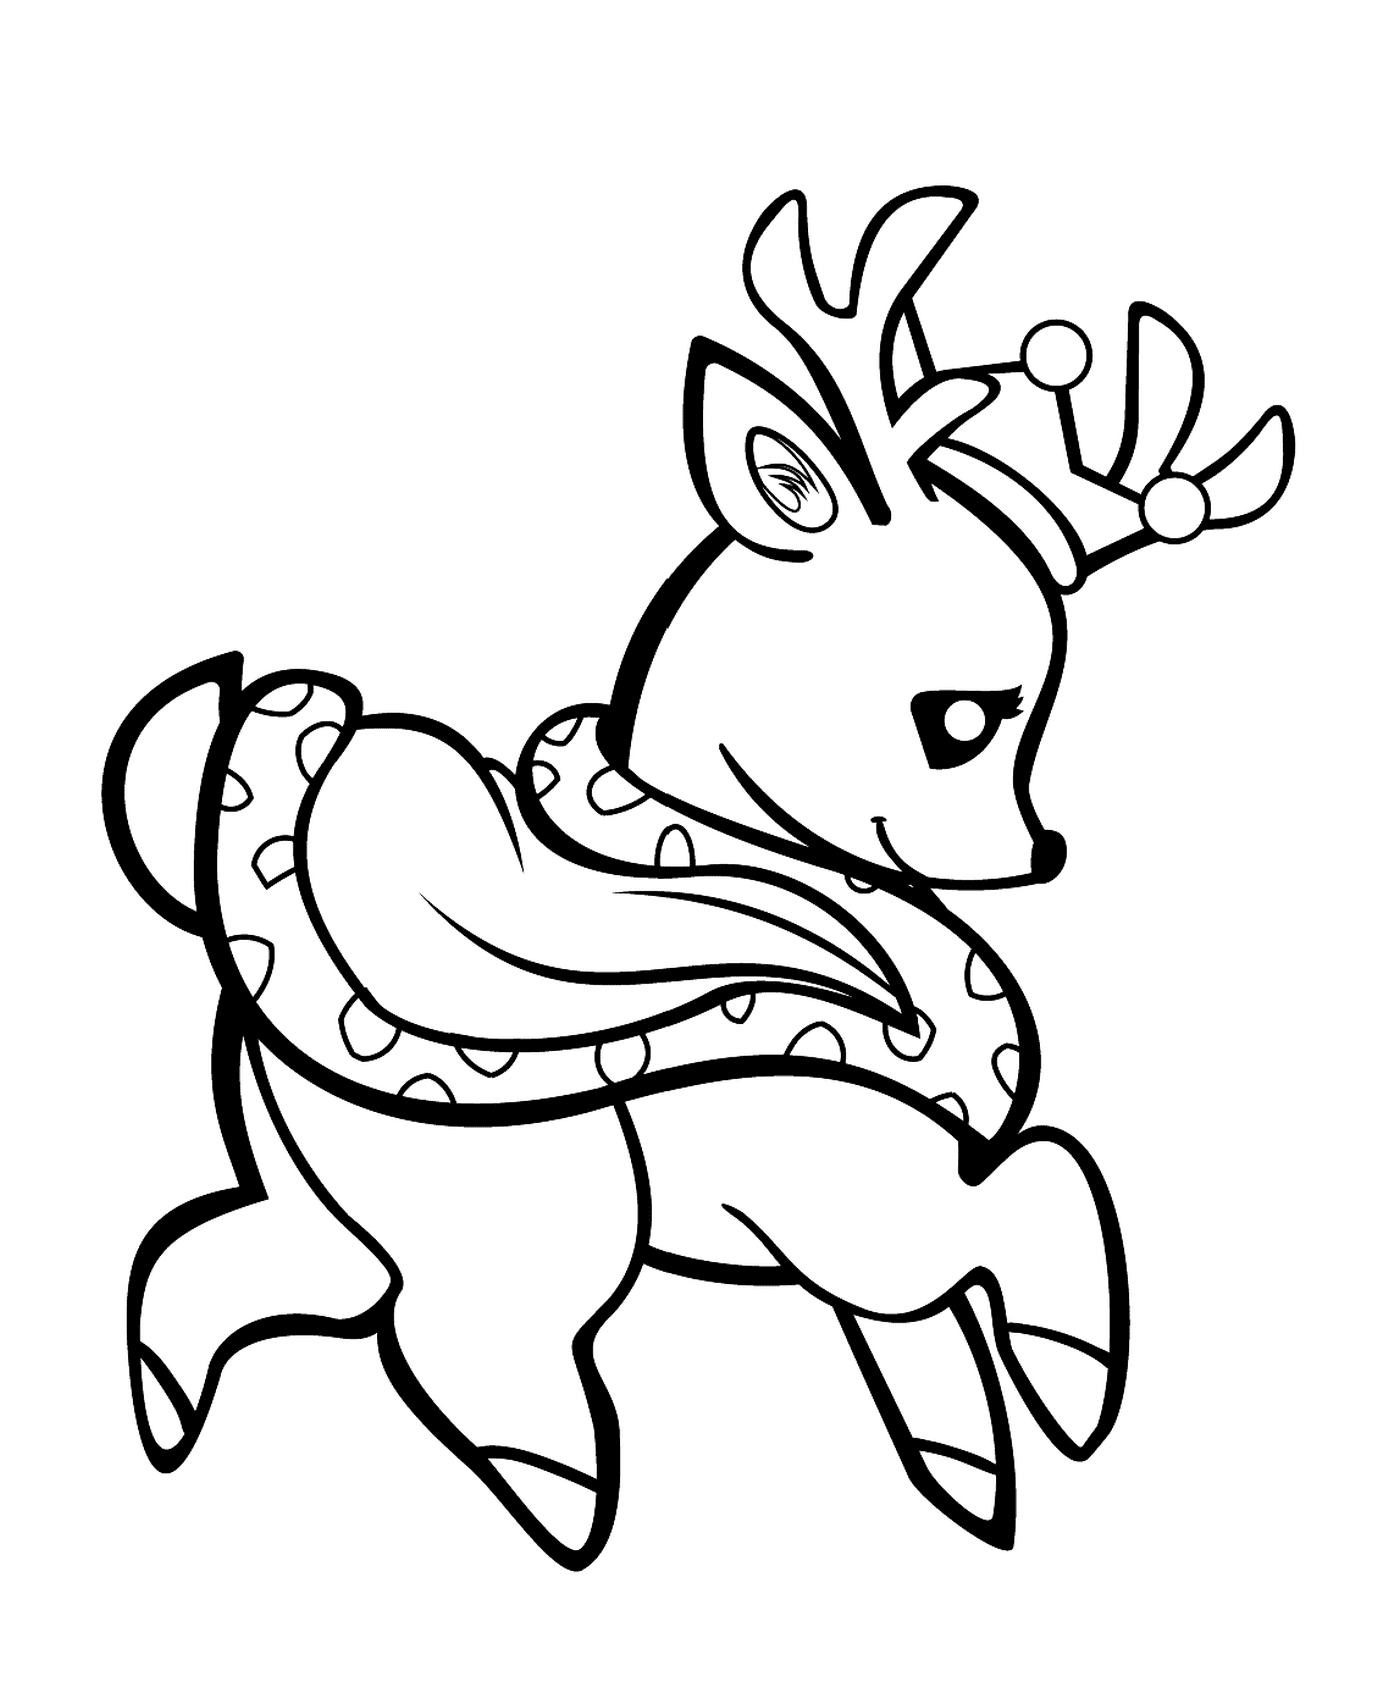  A deer with a crown 